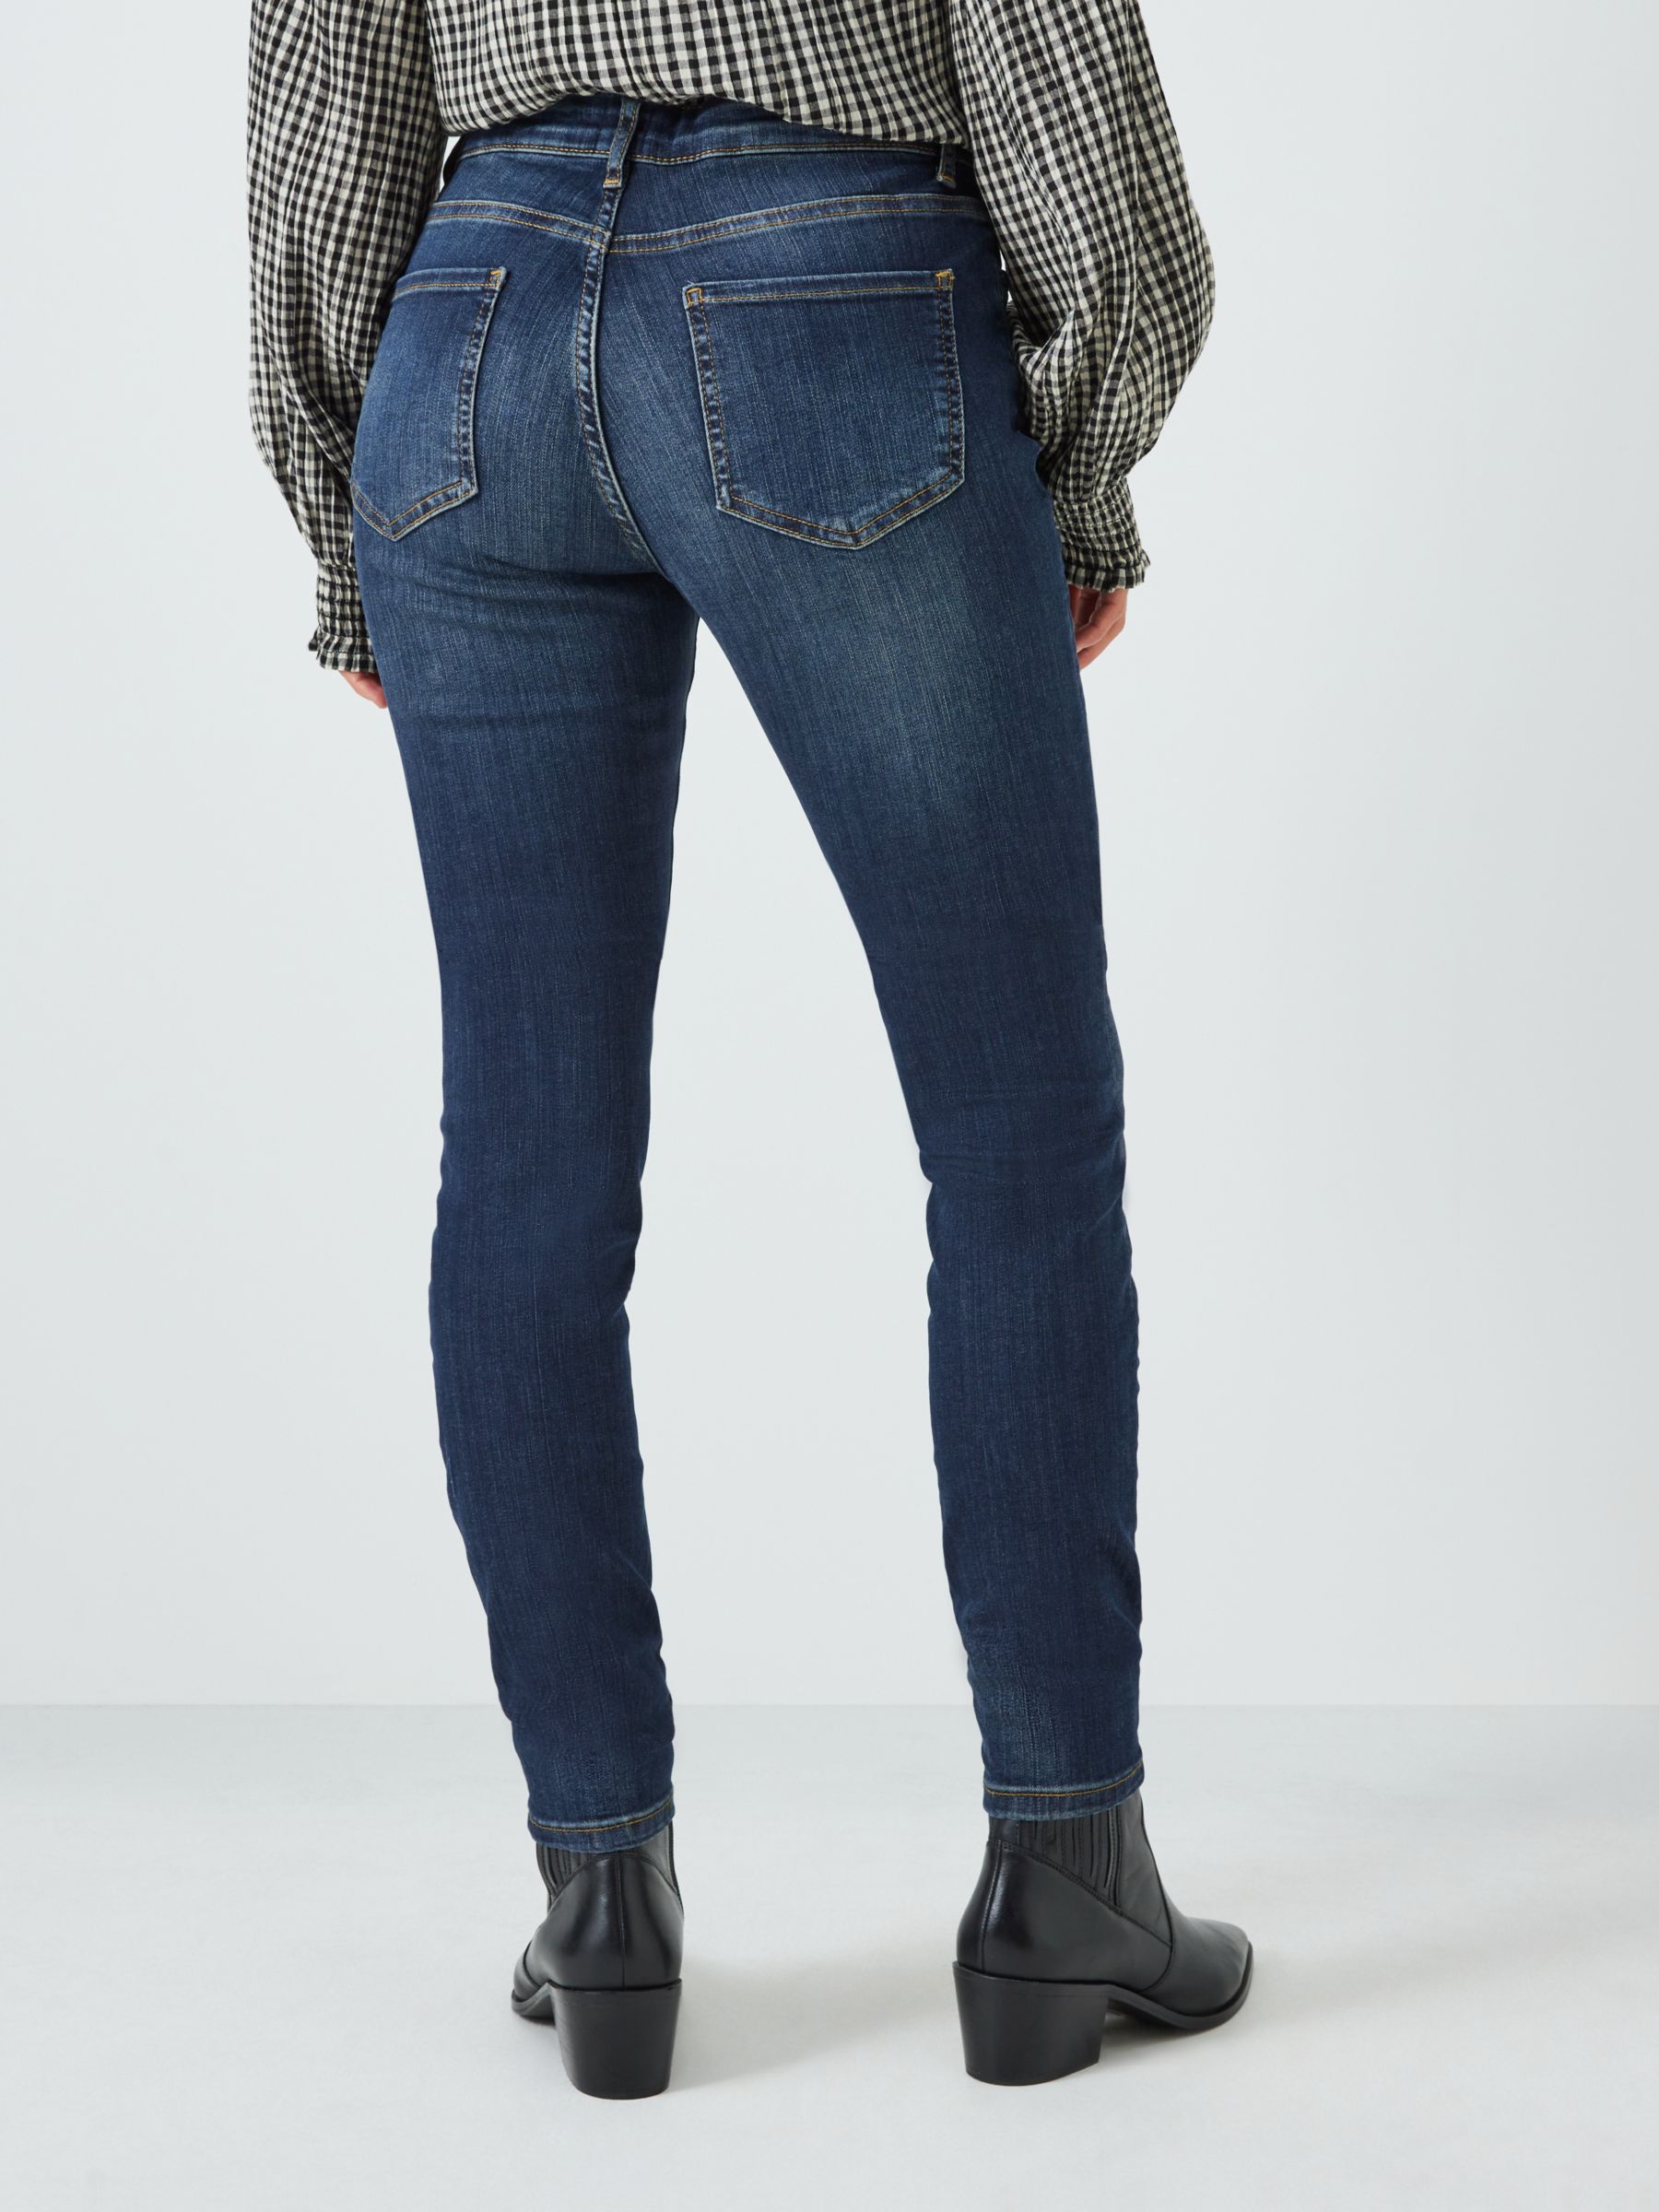 AND/OR Abbot Kinney Skinny Jeans, Deja Blue at John Lewis & Partners